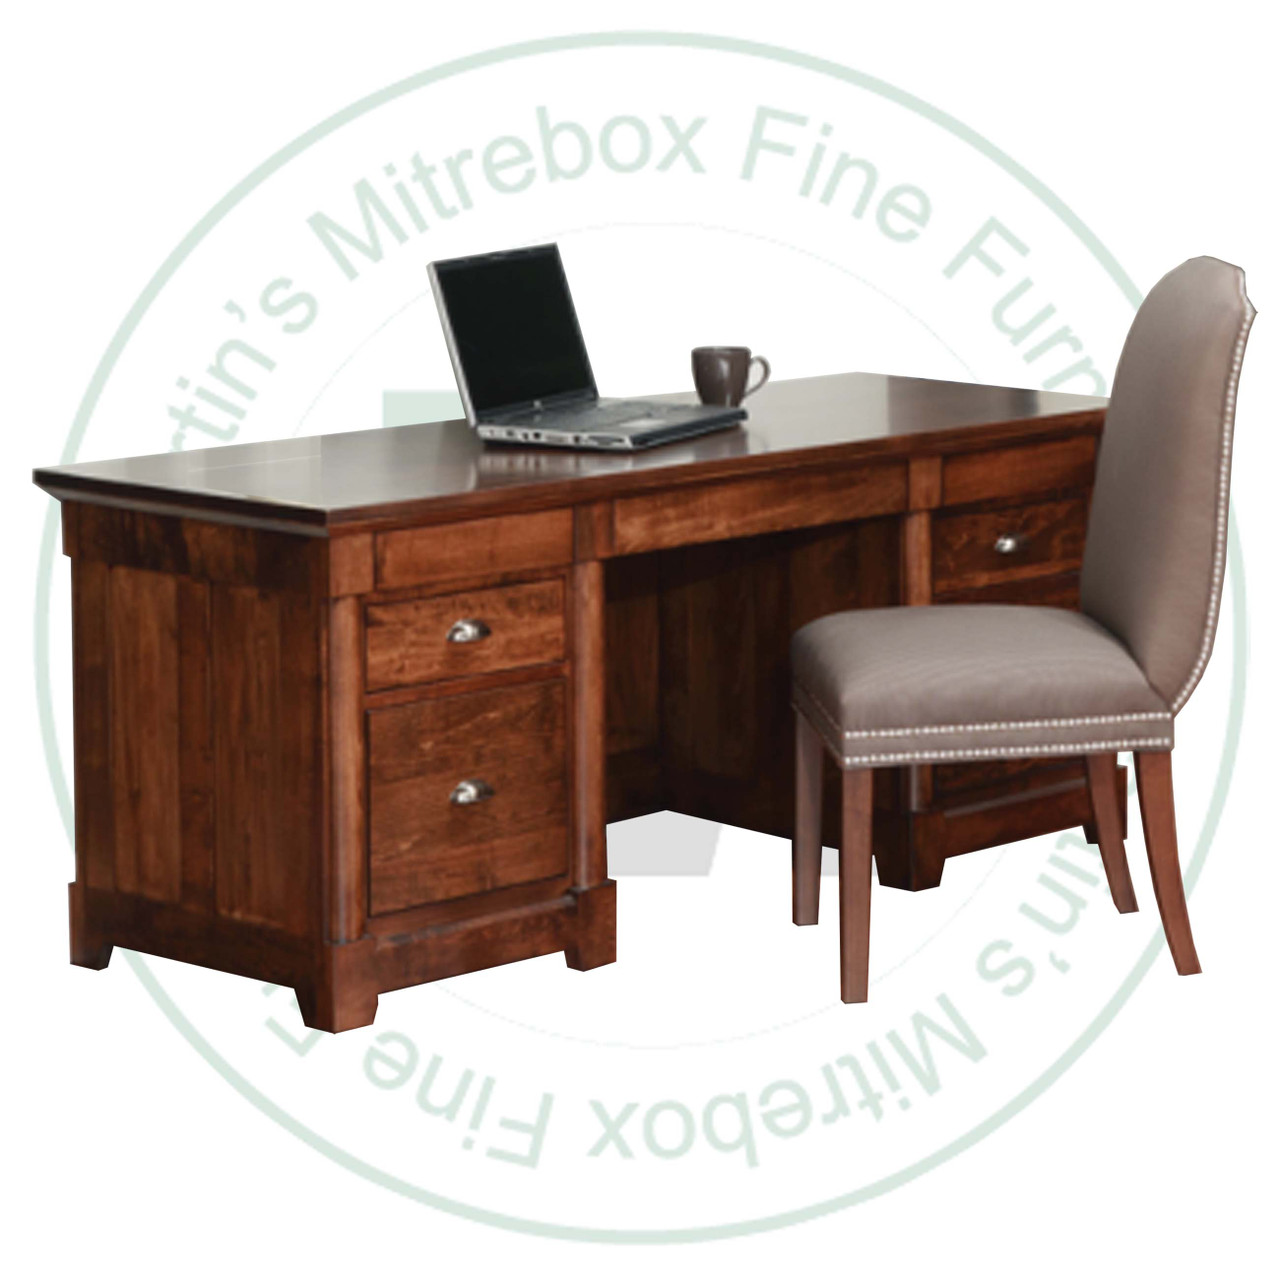 Pine Hudson Valley Executive Desk Has 6 Drawers